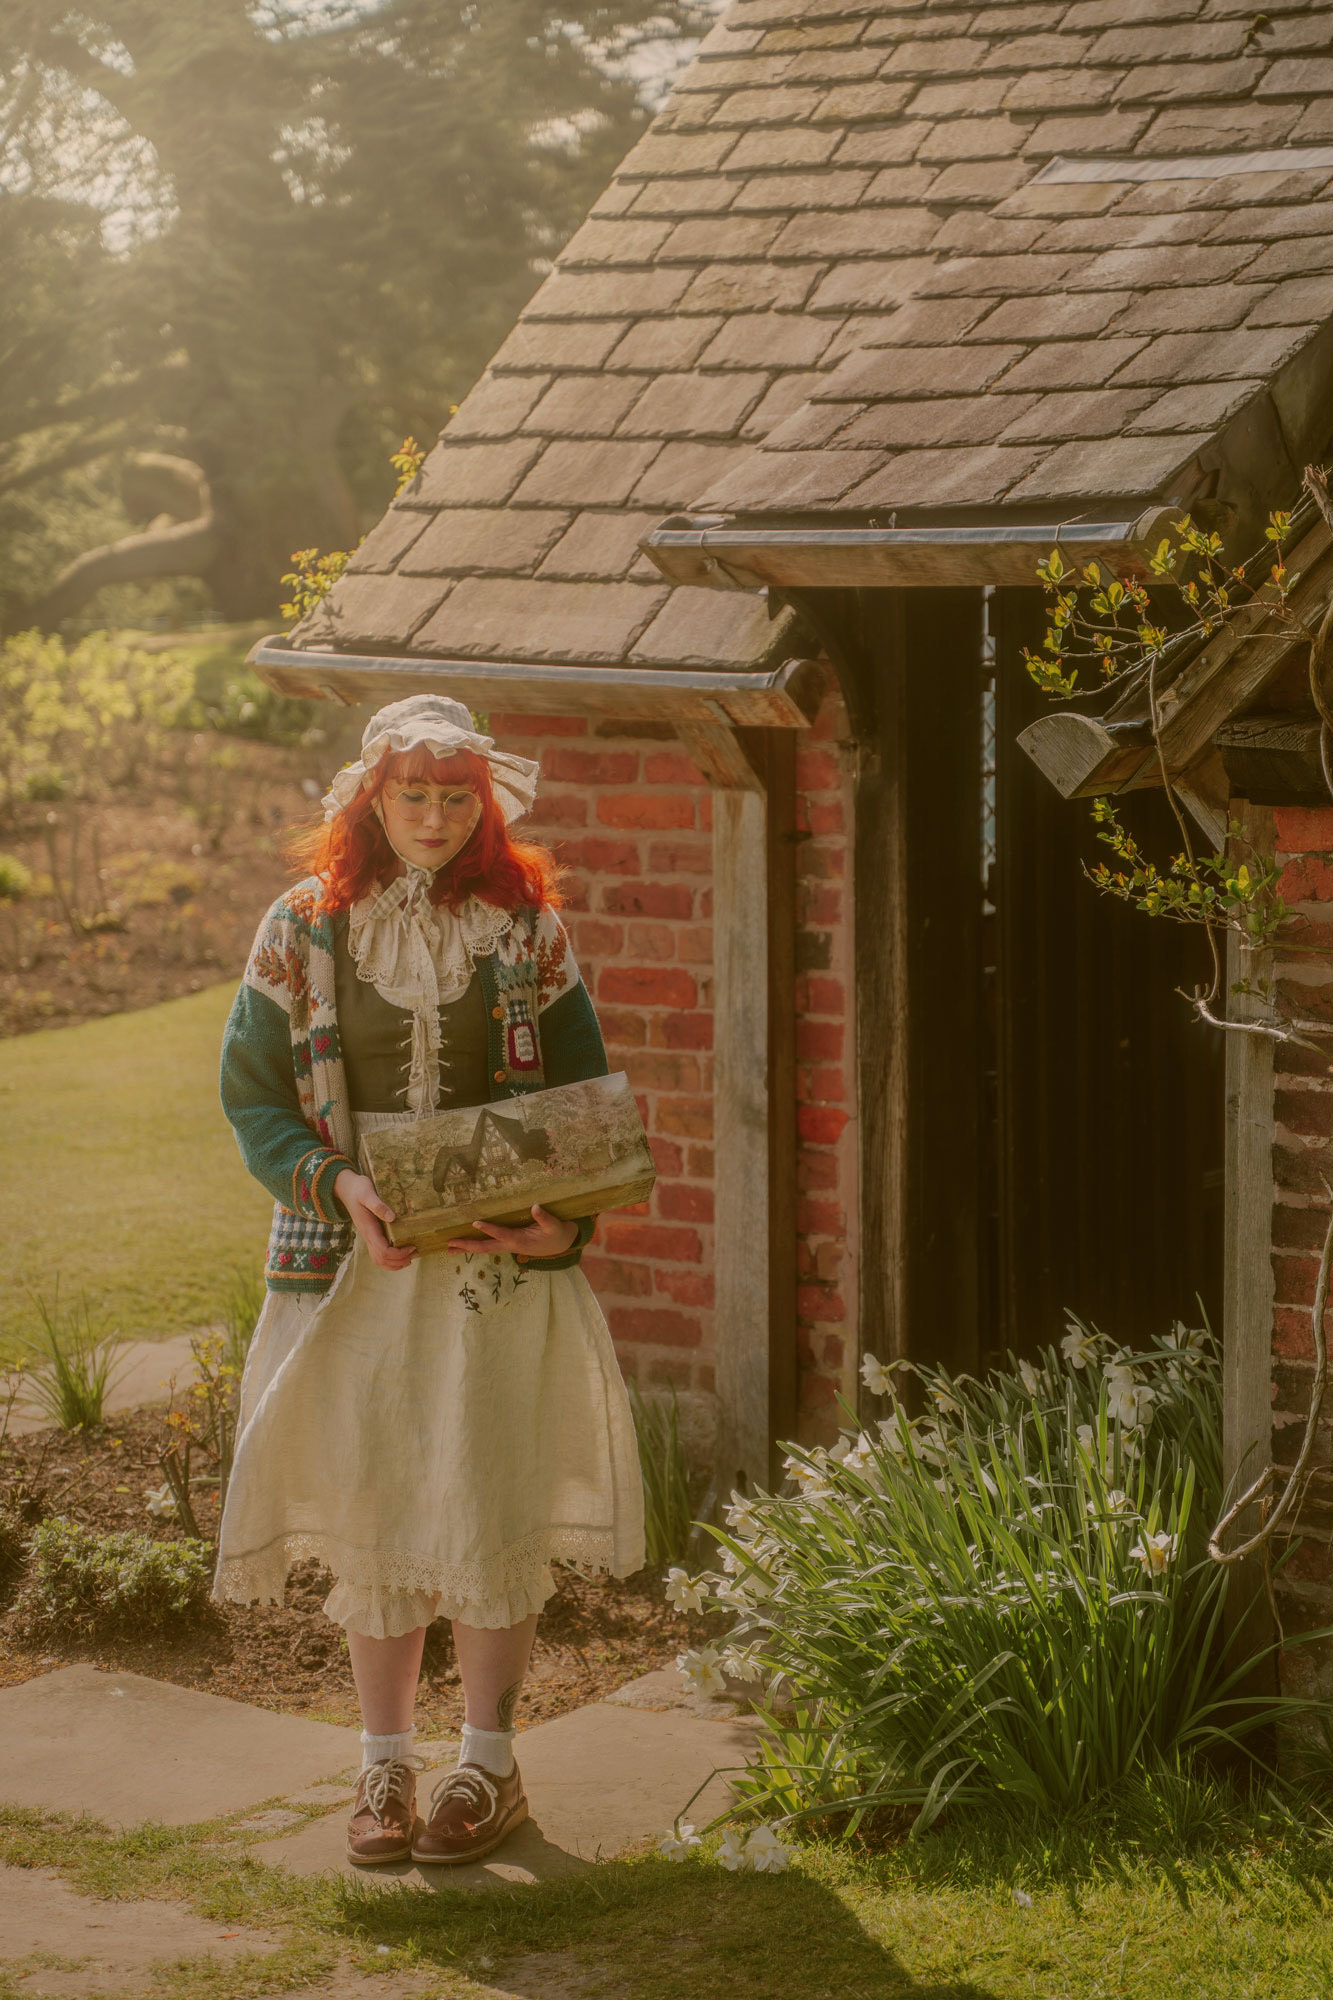 A woman in a knit sweater and pinafore dress wearing a bonnet steps out of a brick cottage